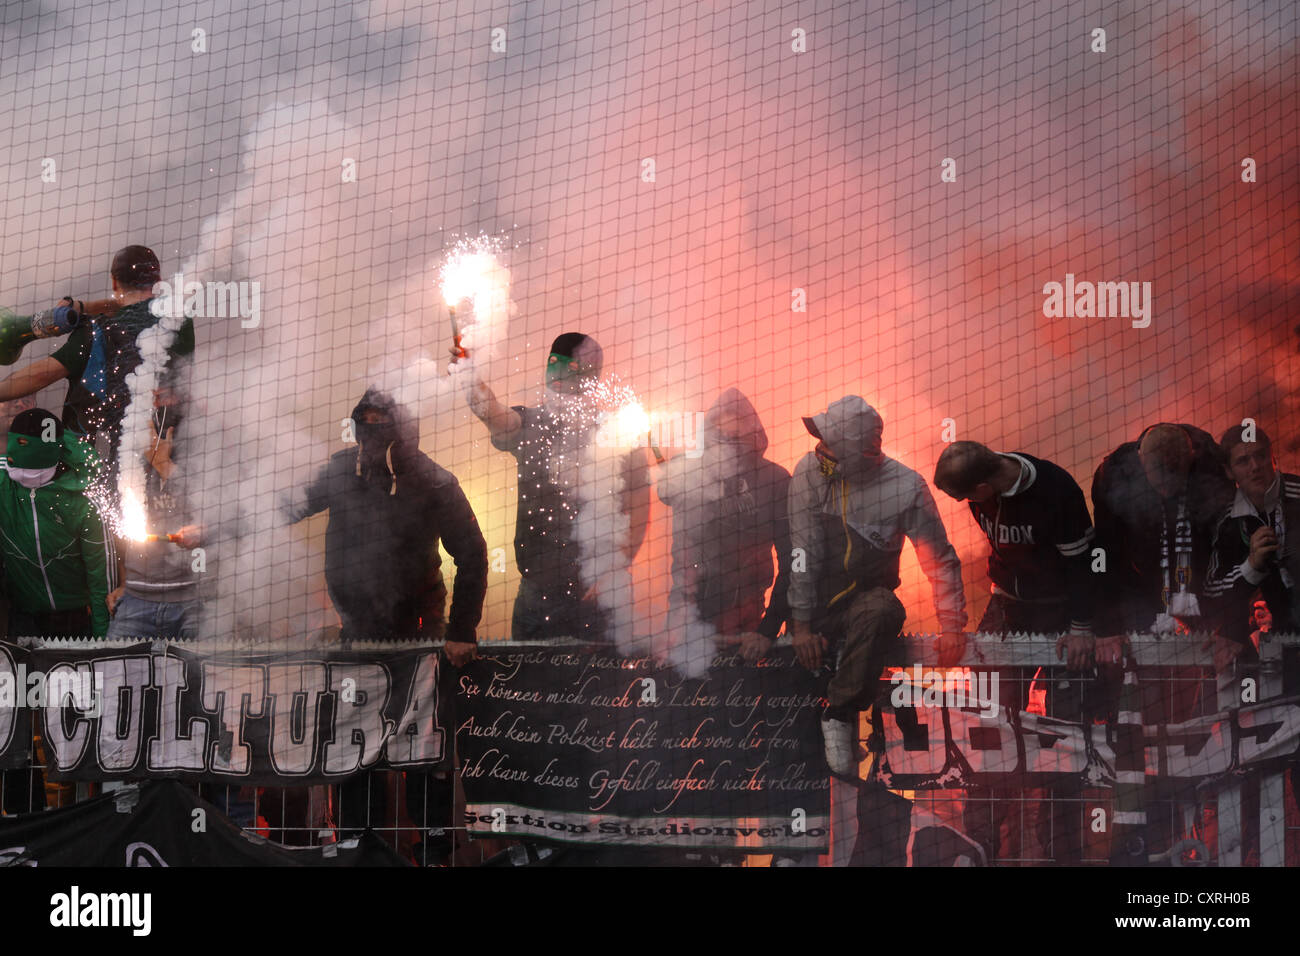 Fans of Borussia Moenchengladbach have ignited fireworks and flares during the match FSV Mainz 05 vs Borussia Moenchengladbach Stock Photo